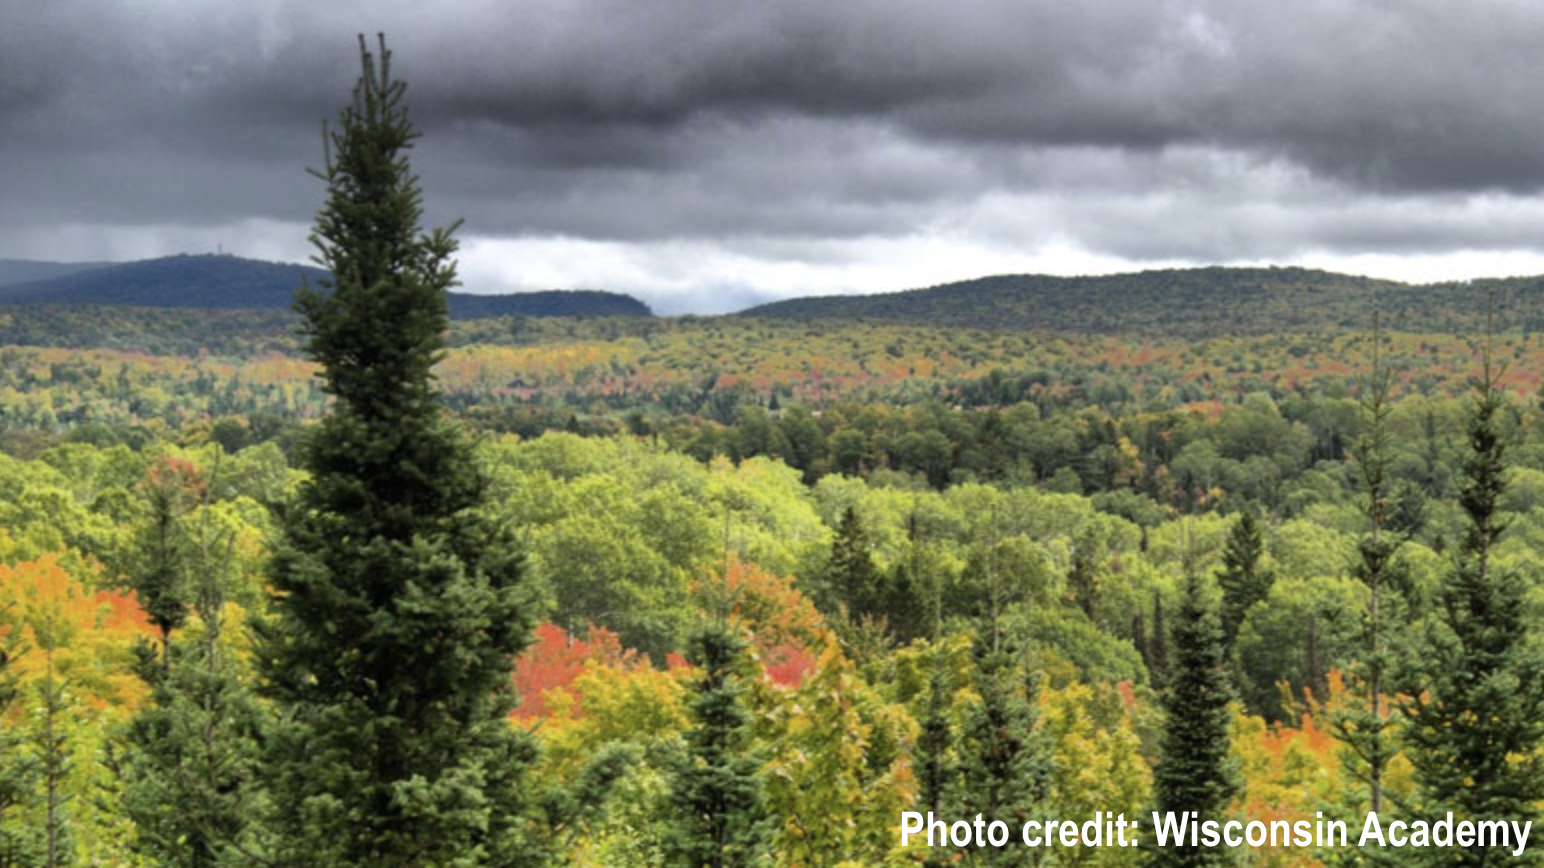 Fall colors at the Penokee Range, showing forests and hills and approaching storm clouds